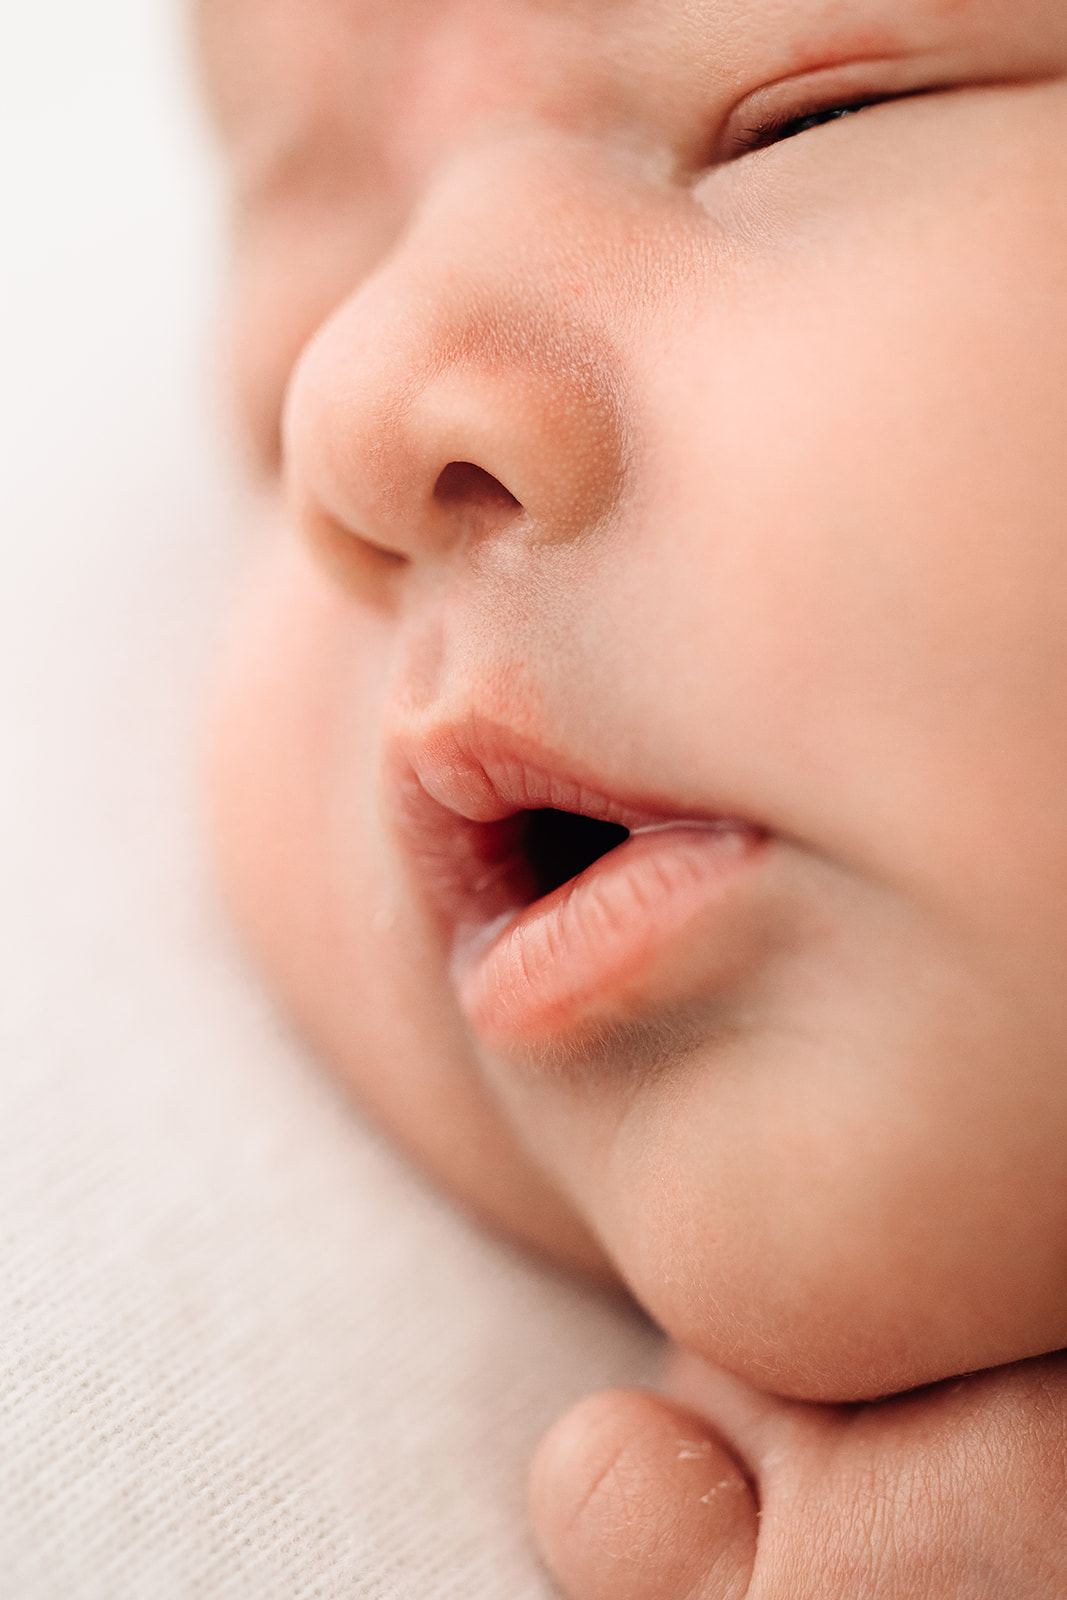 A sleeping newborn baby's face with mouth open after IVF St Louis